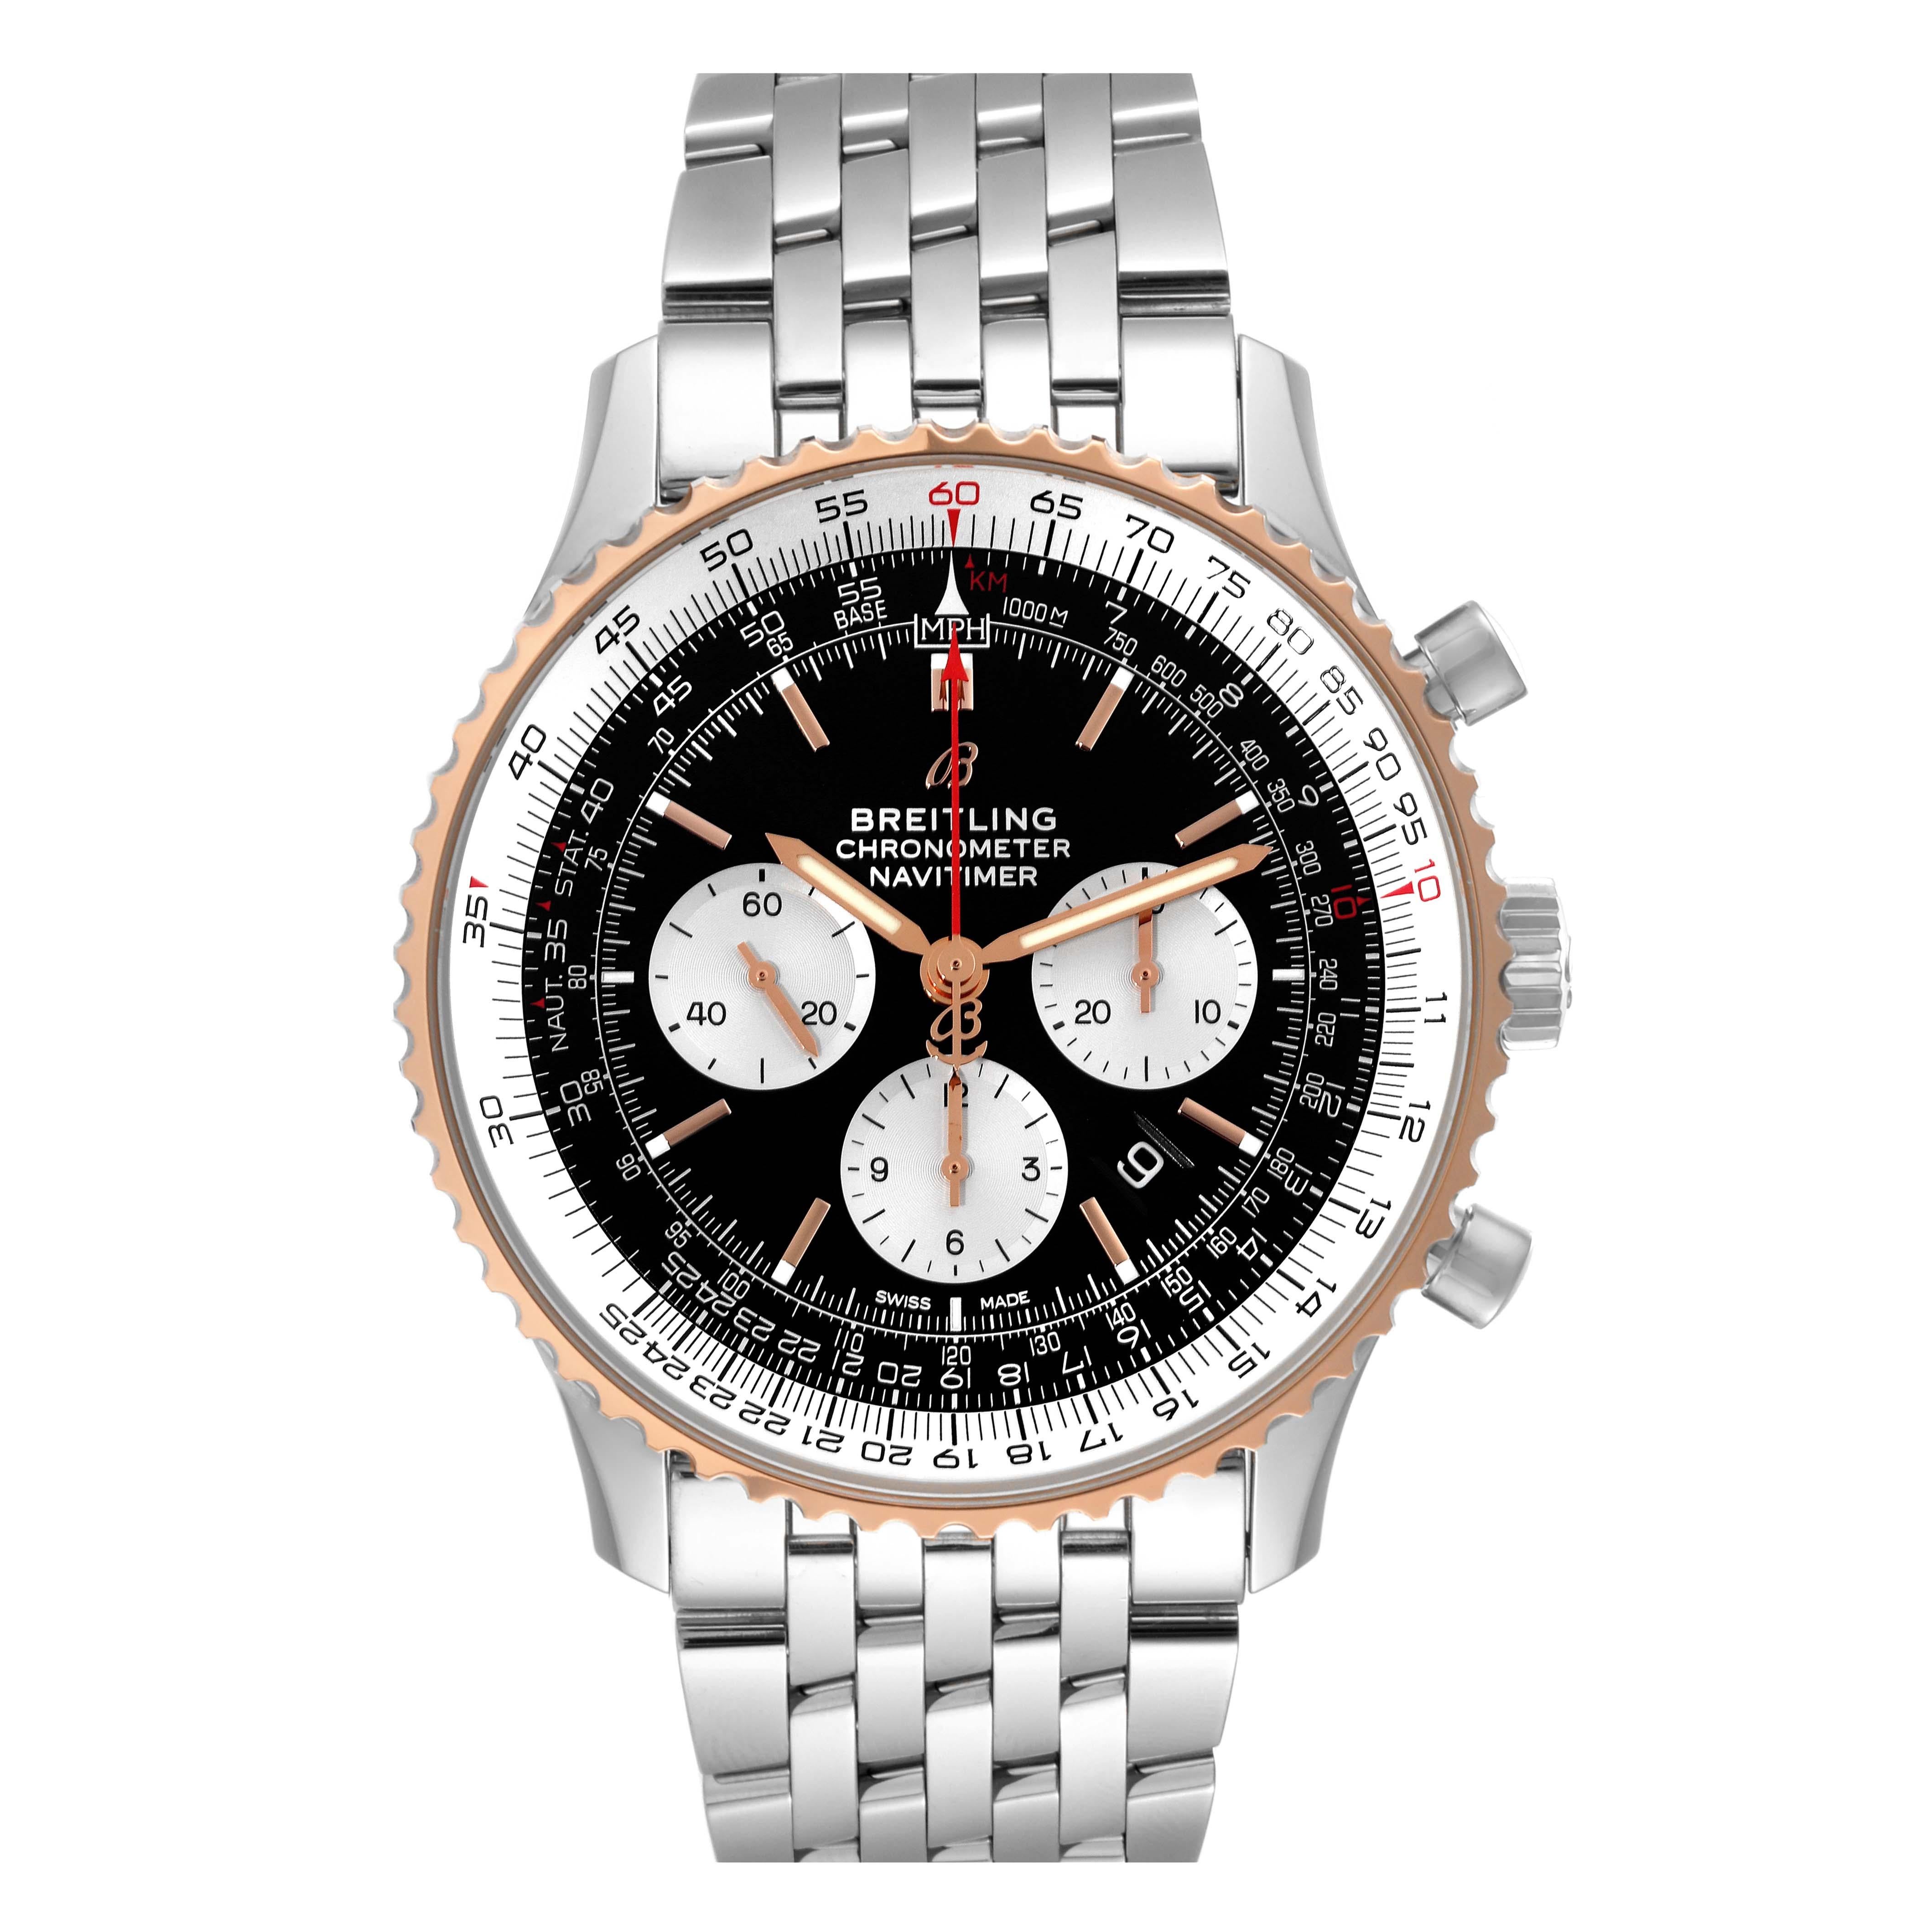 Breitling Navitimer 01 Steel Rose Gold Black Dial Mens Watch UB0127 Card. Self-winding automatic officially certified chronometer movement. Chronograph function. Stainless steel case 46.0 mm in diameter. Case thickness 14.50 mm. Transparent